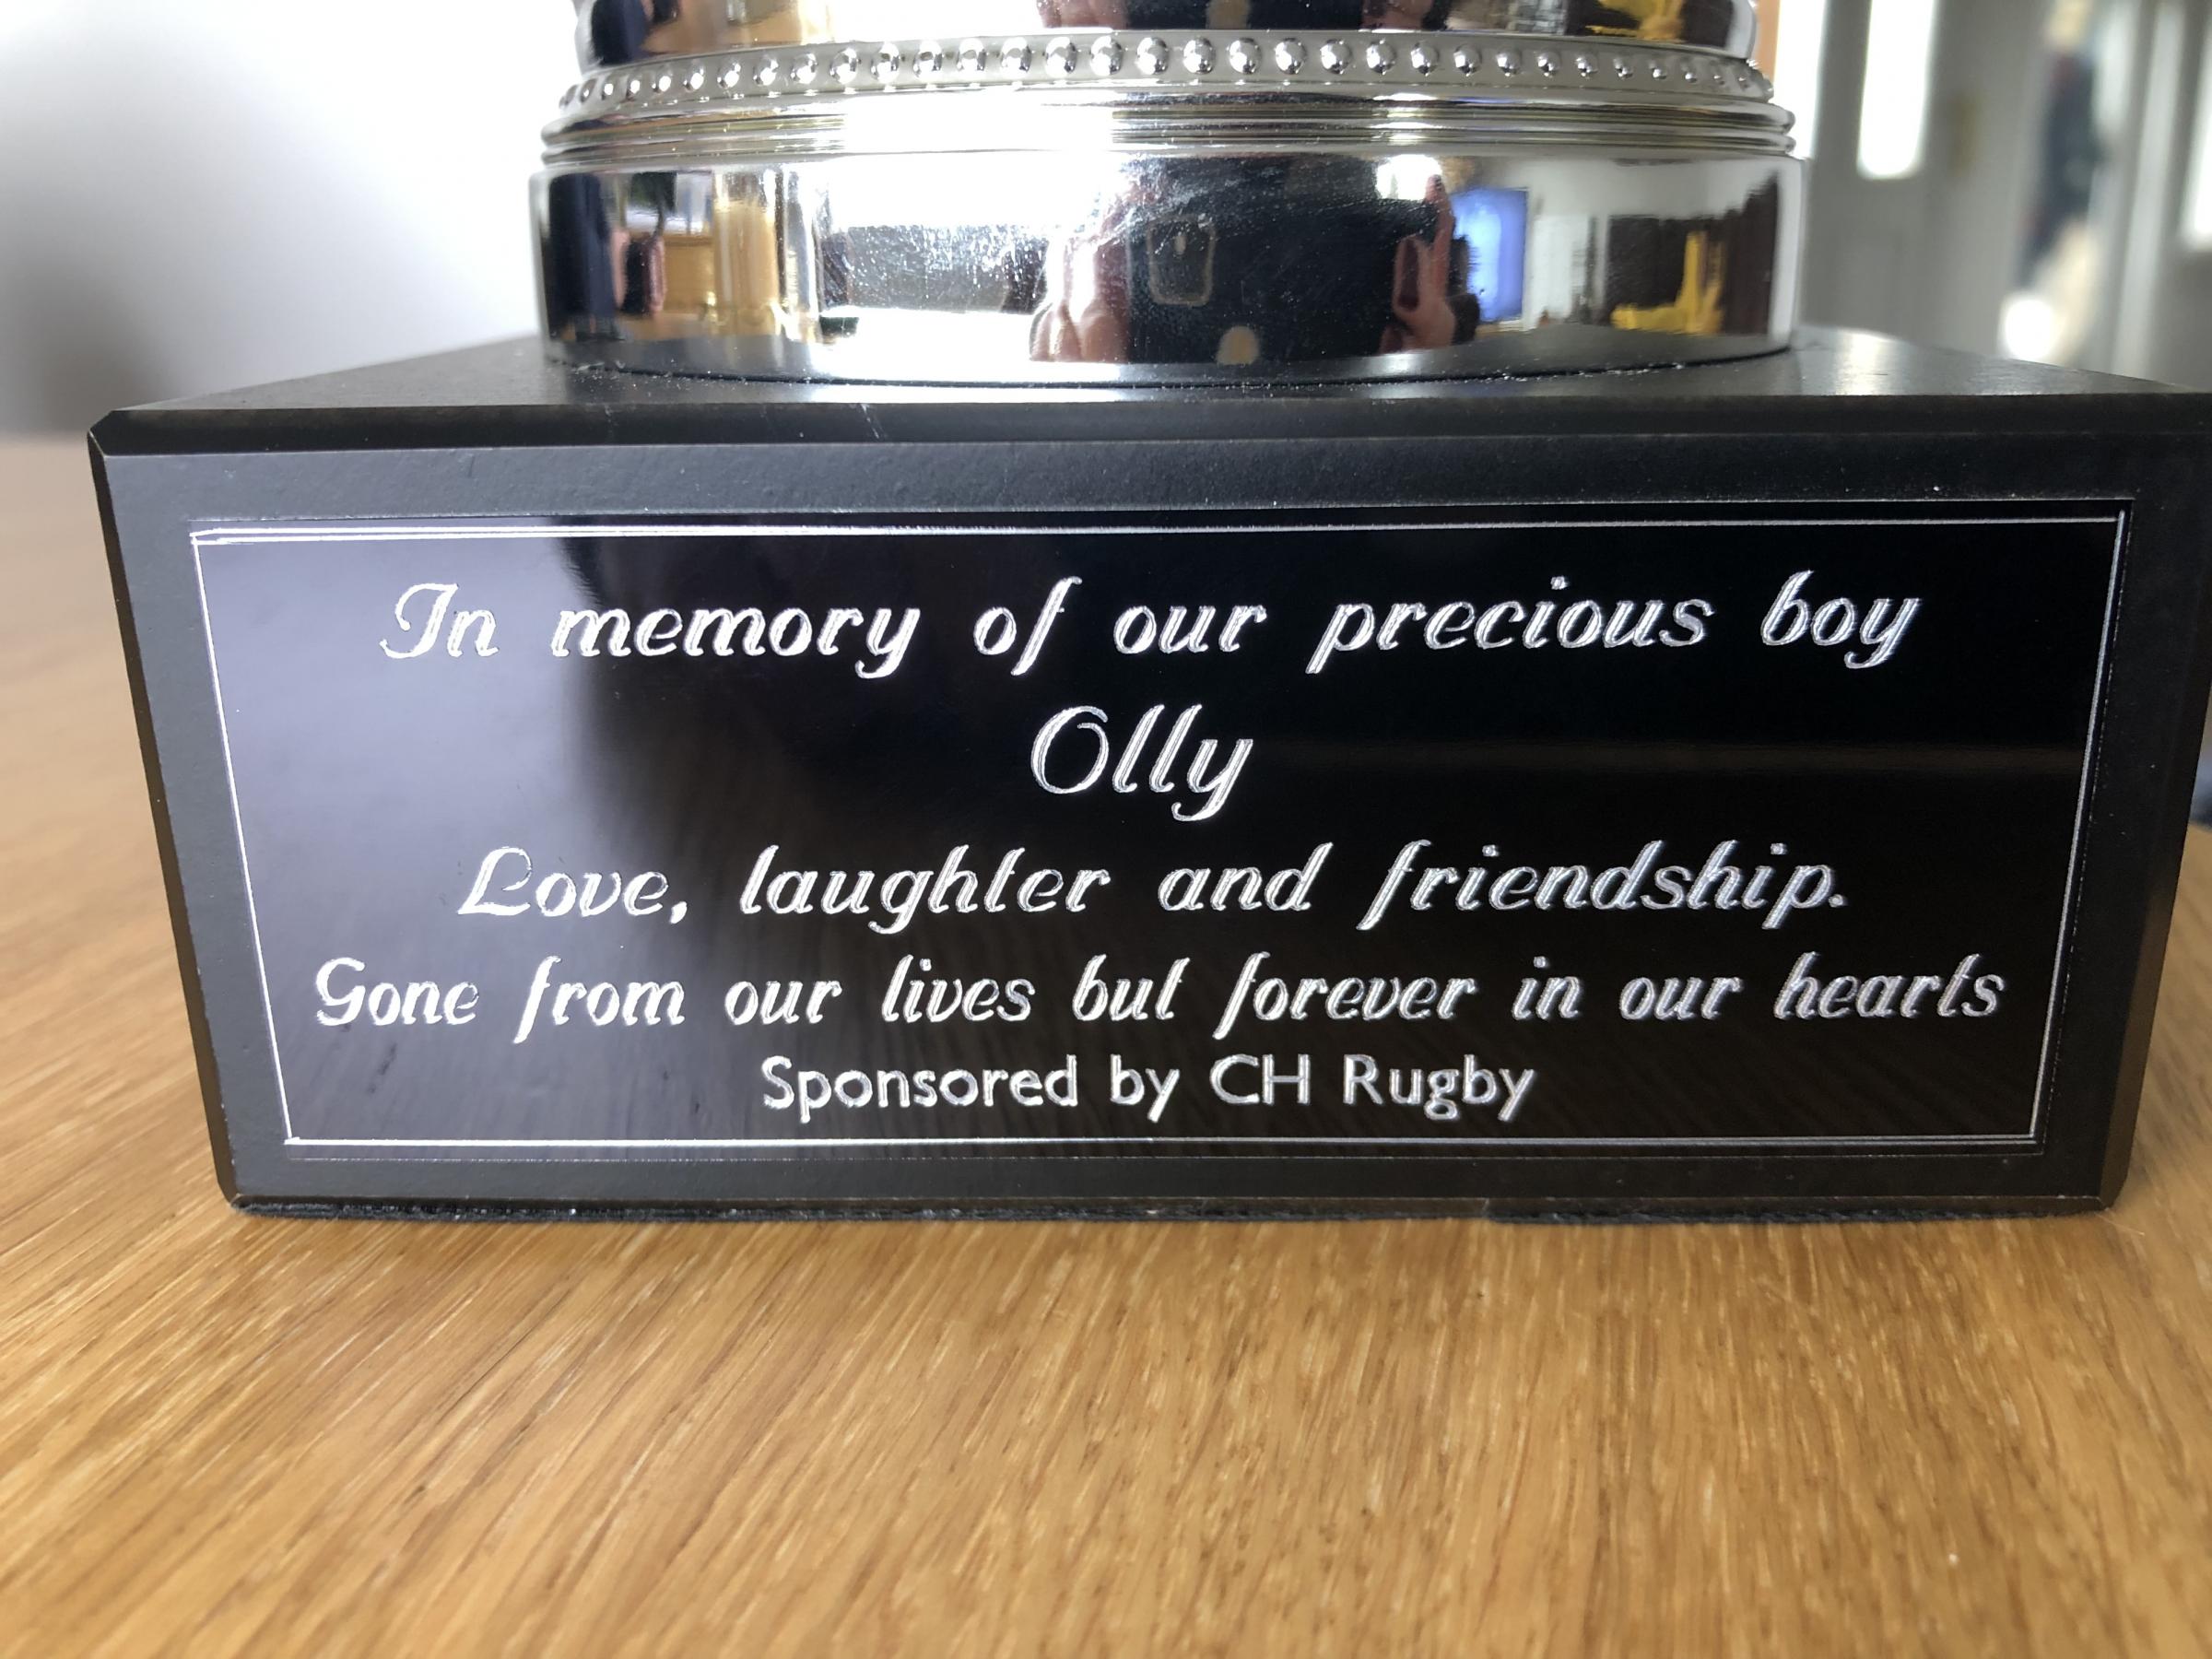 The engraving on the Olly Stephens Memorial Cup